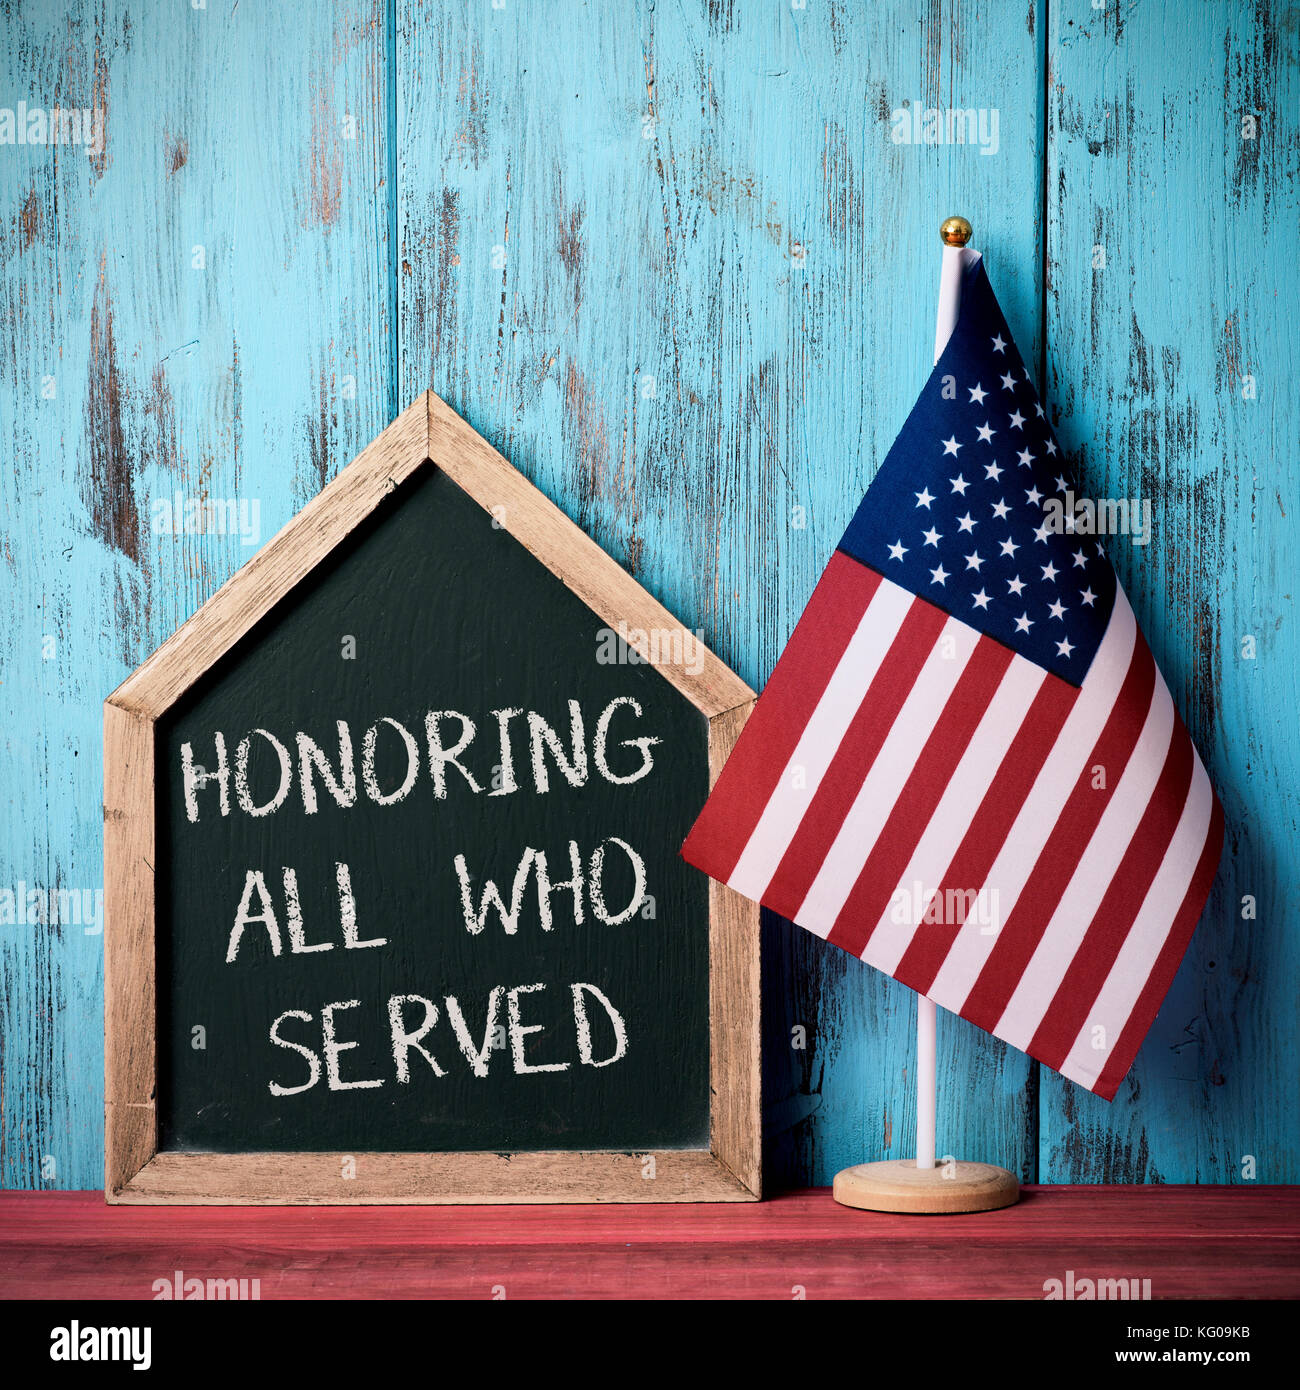 the text honoring all who served written in a house-shaped chalkboard and a flag of the United States, against a blue rustic wooden background Stock Photo